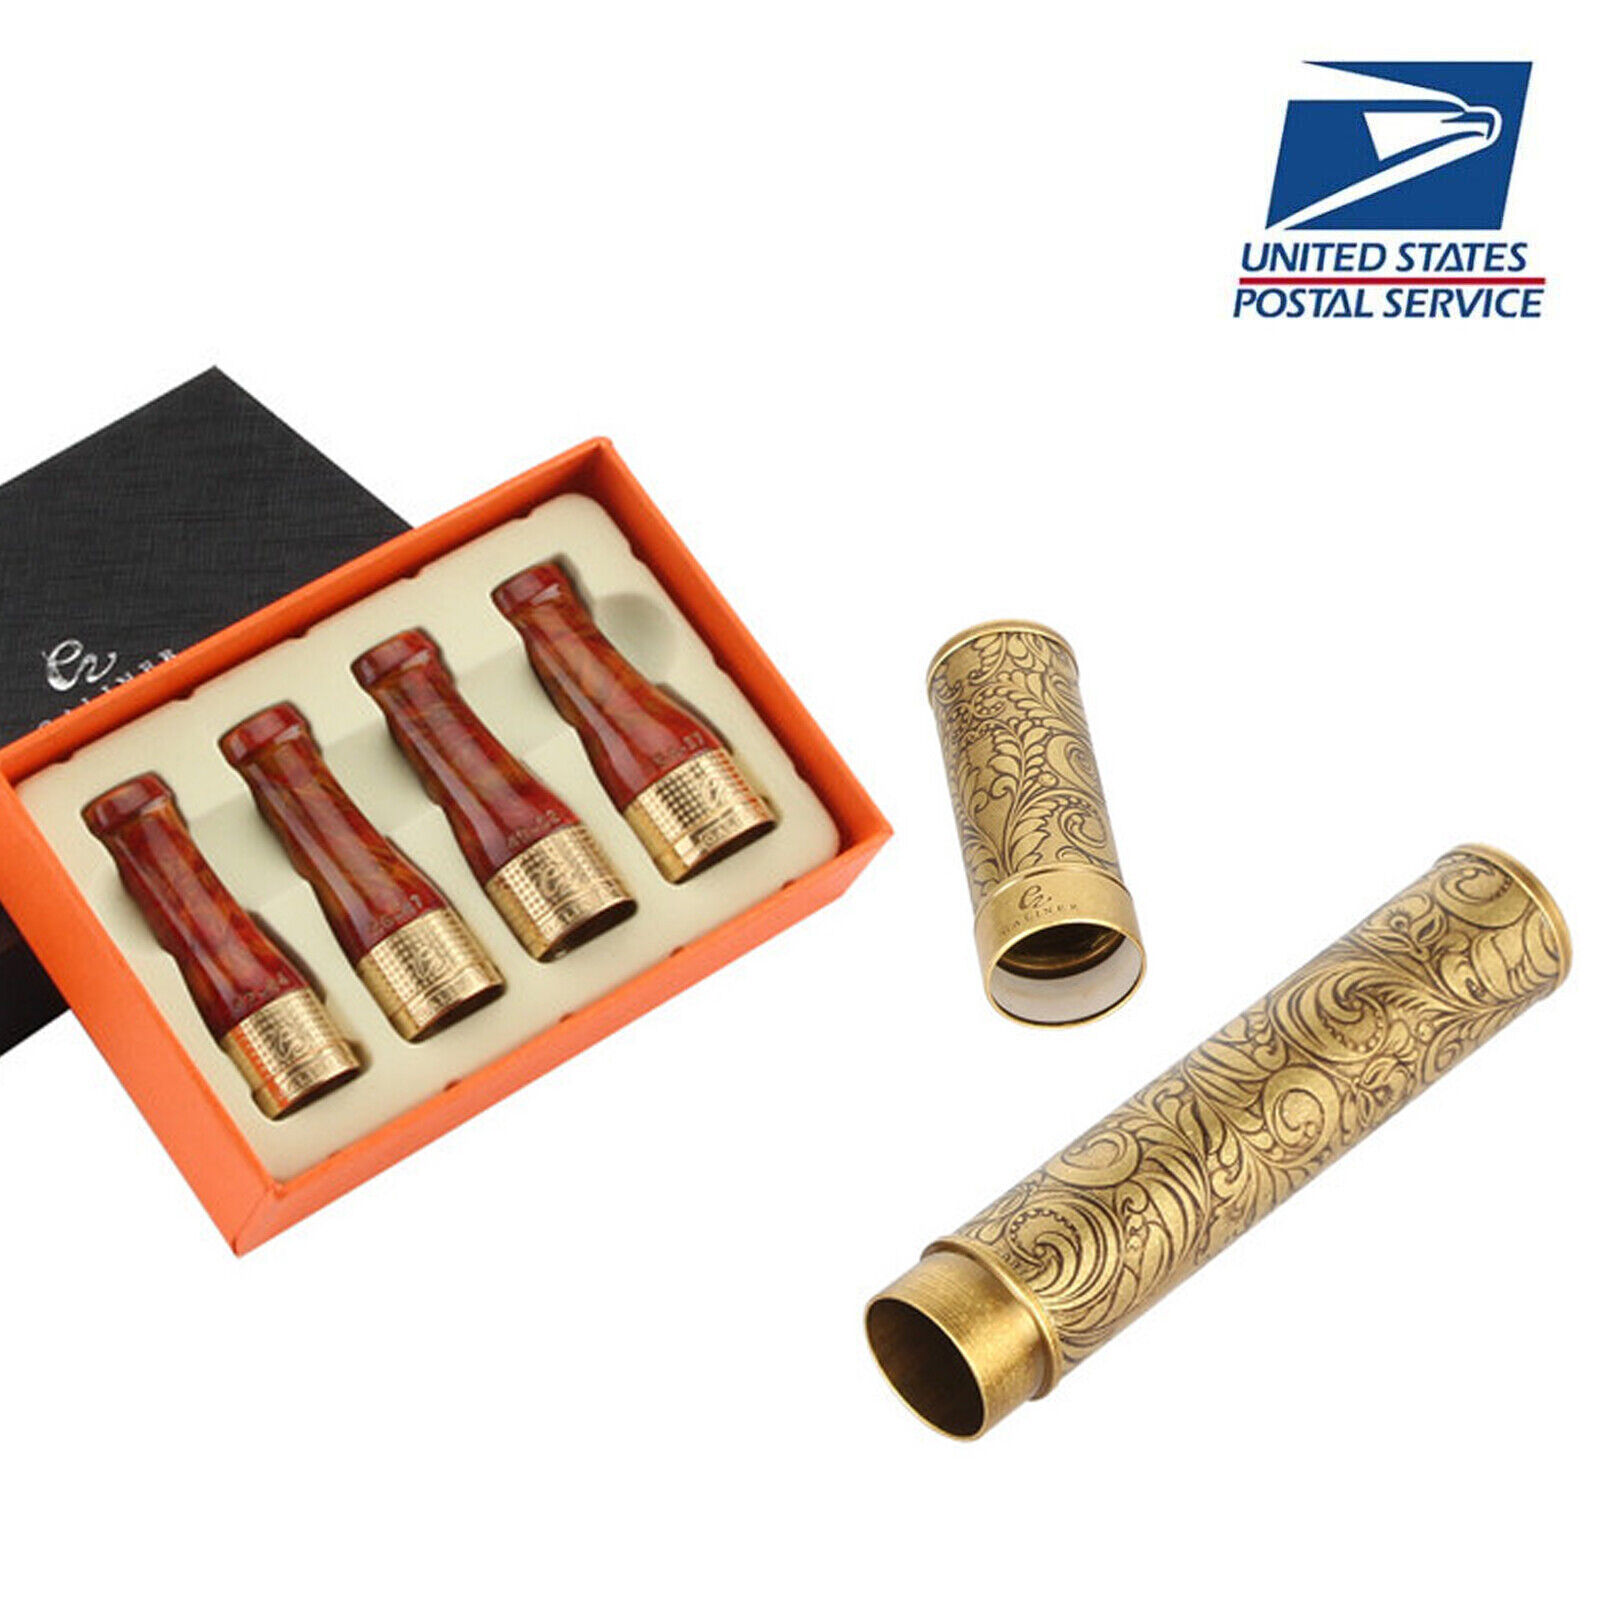 Galiner Pure Copper Cigar Holders Set 4 Sizes and Single Tube Cigar Case Travel